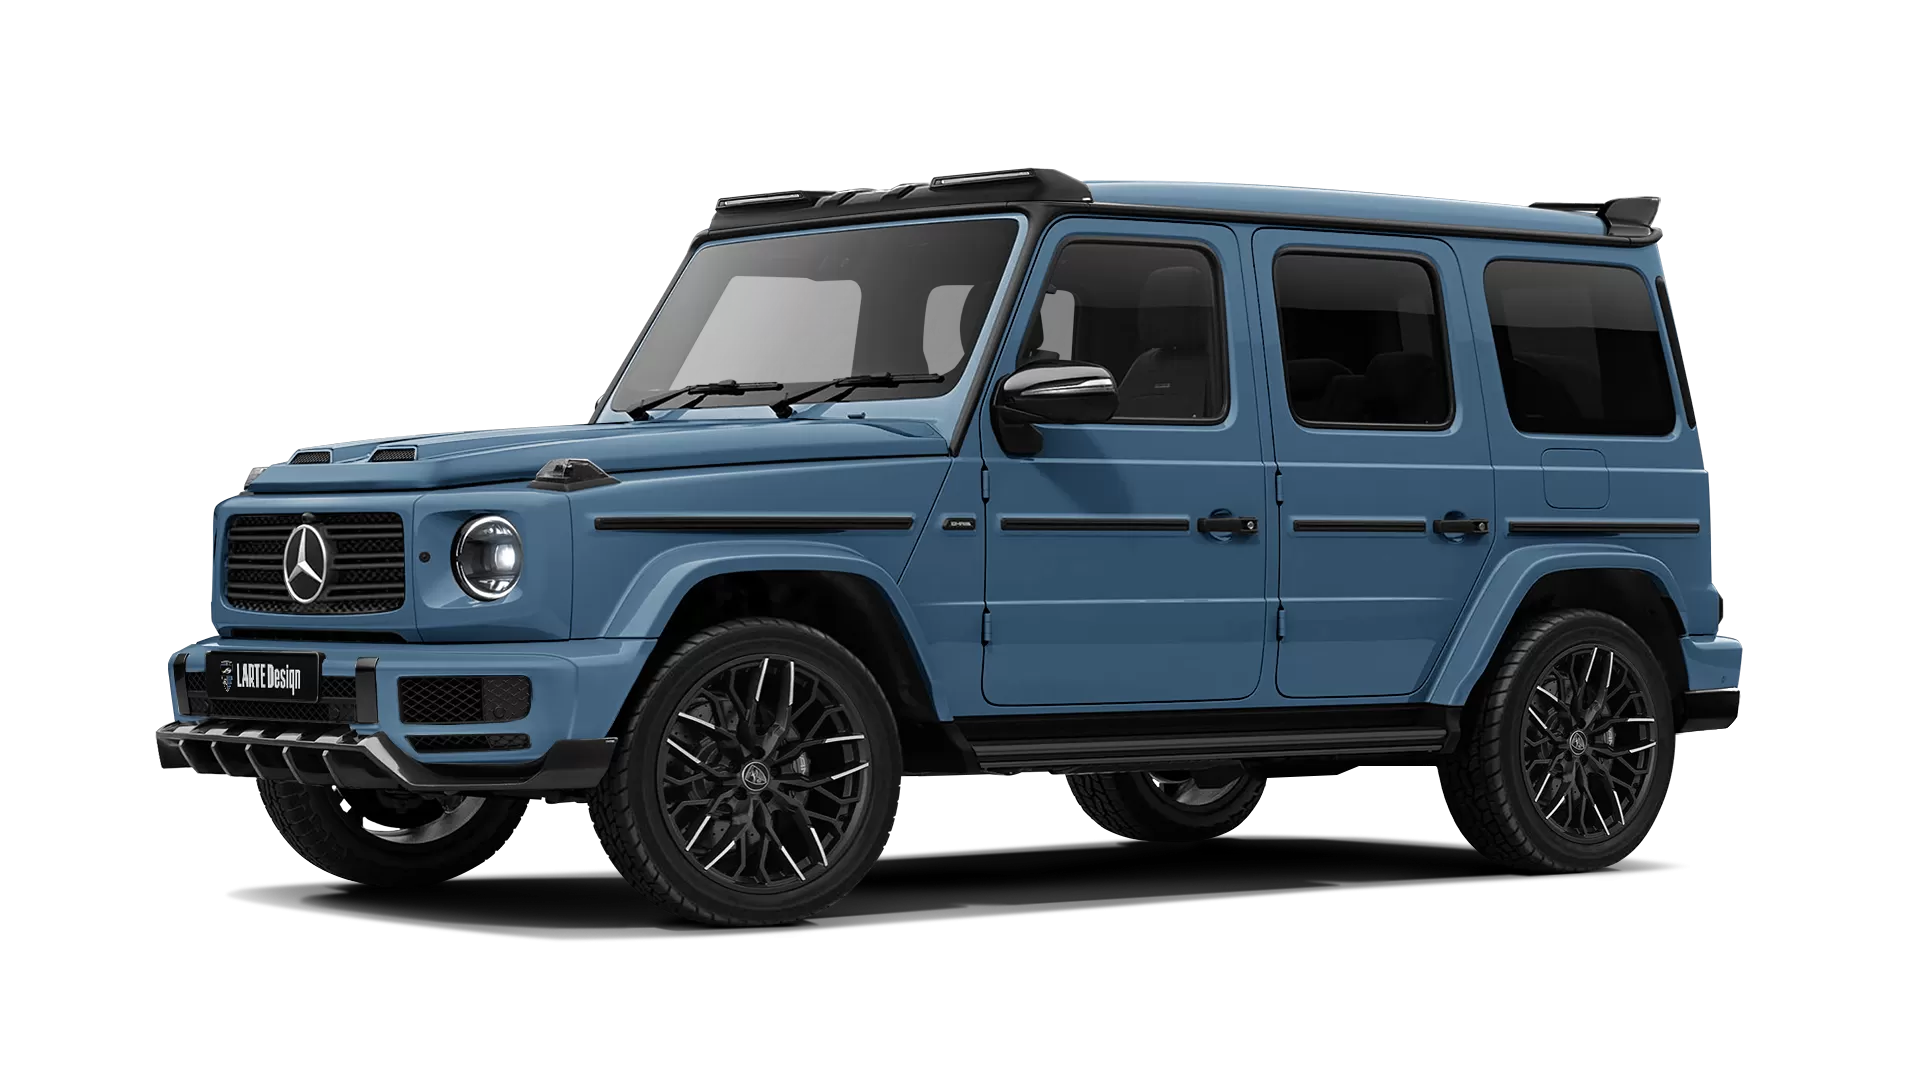 Mercedes G class W463 with painted body kit: front view shown in Vintage Blue